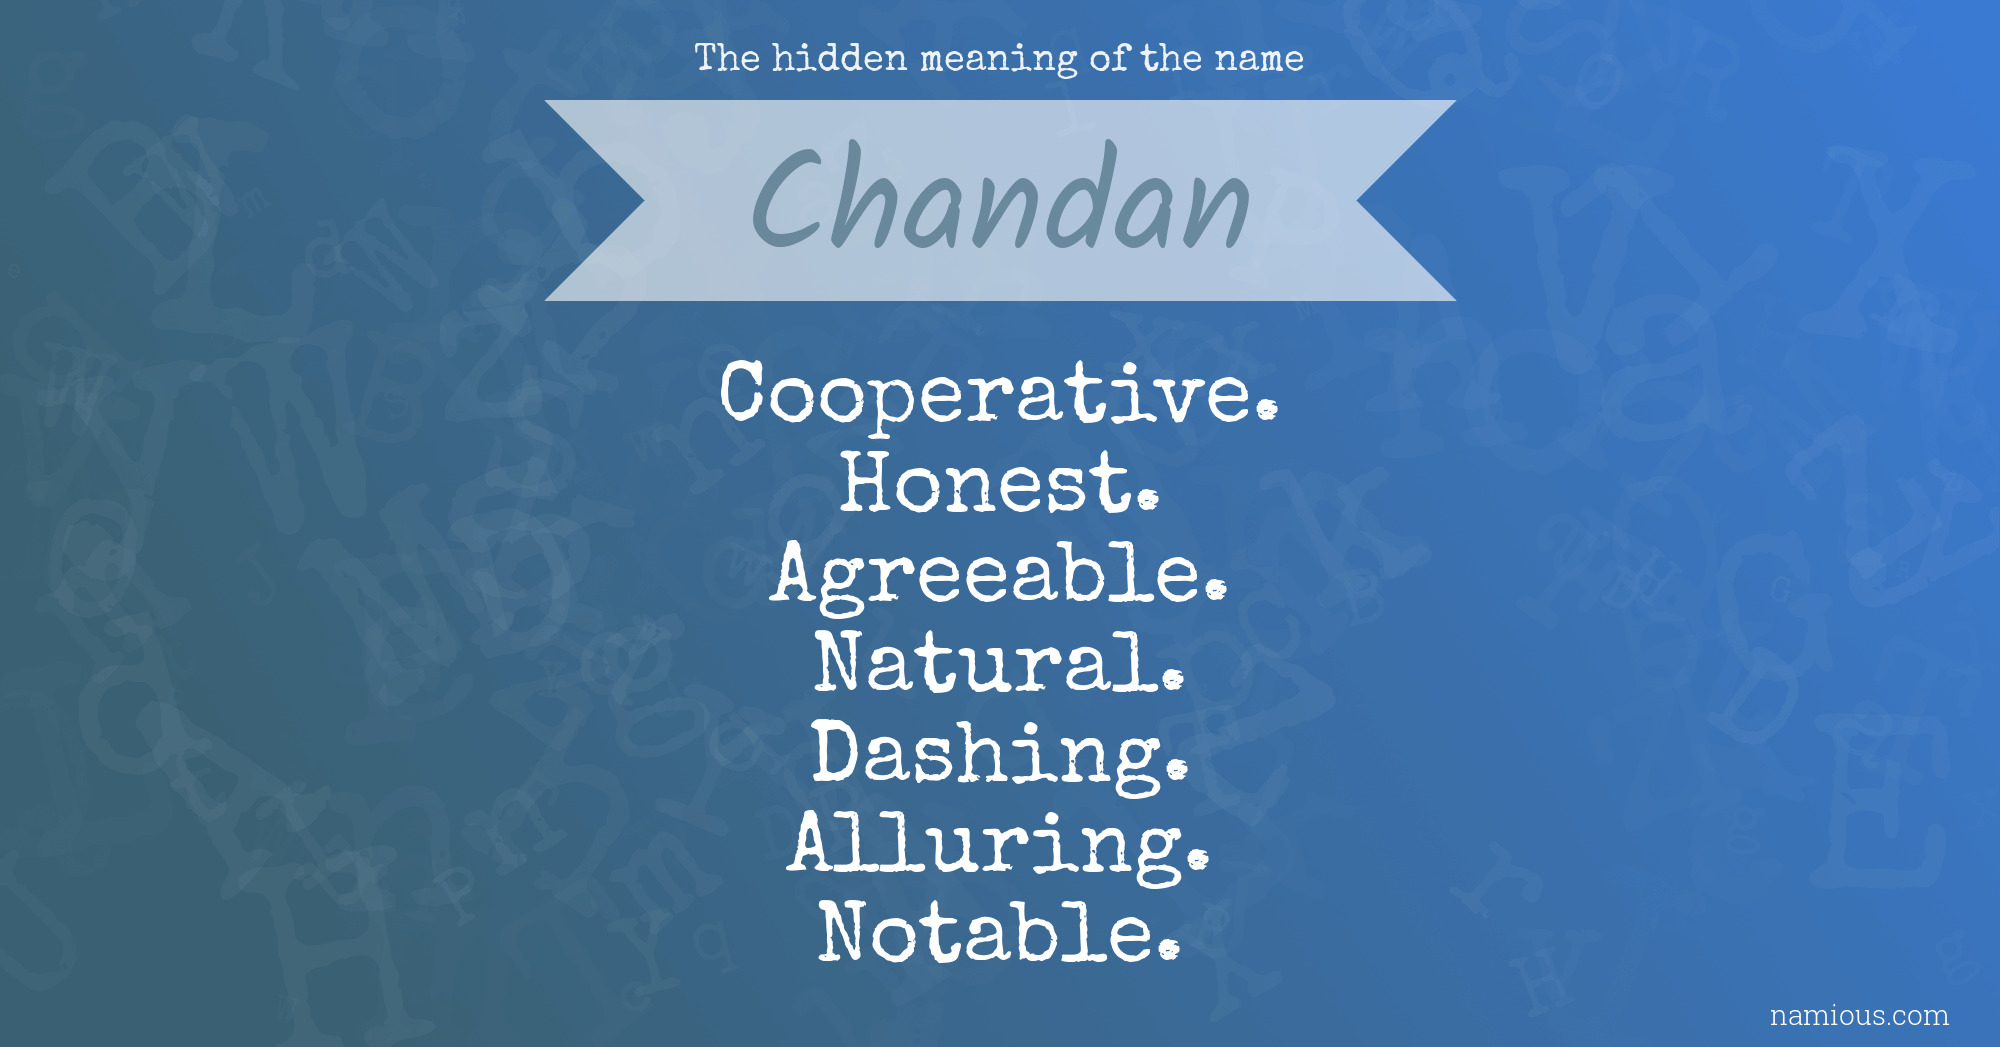 The hidden meaning of the name Chandan